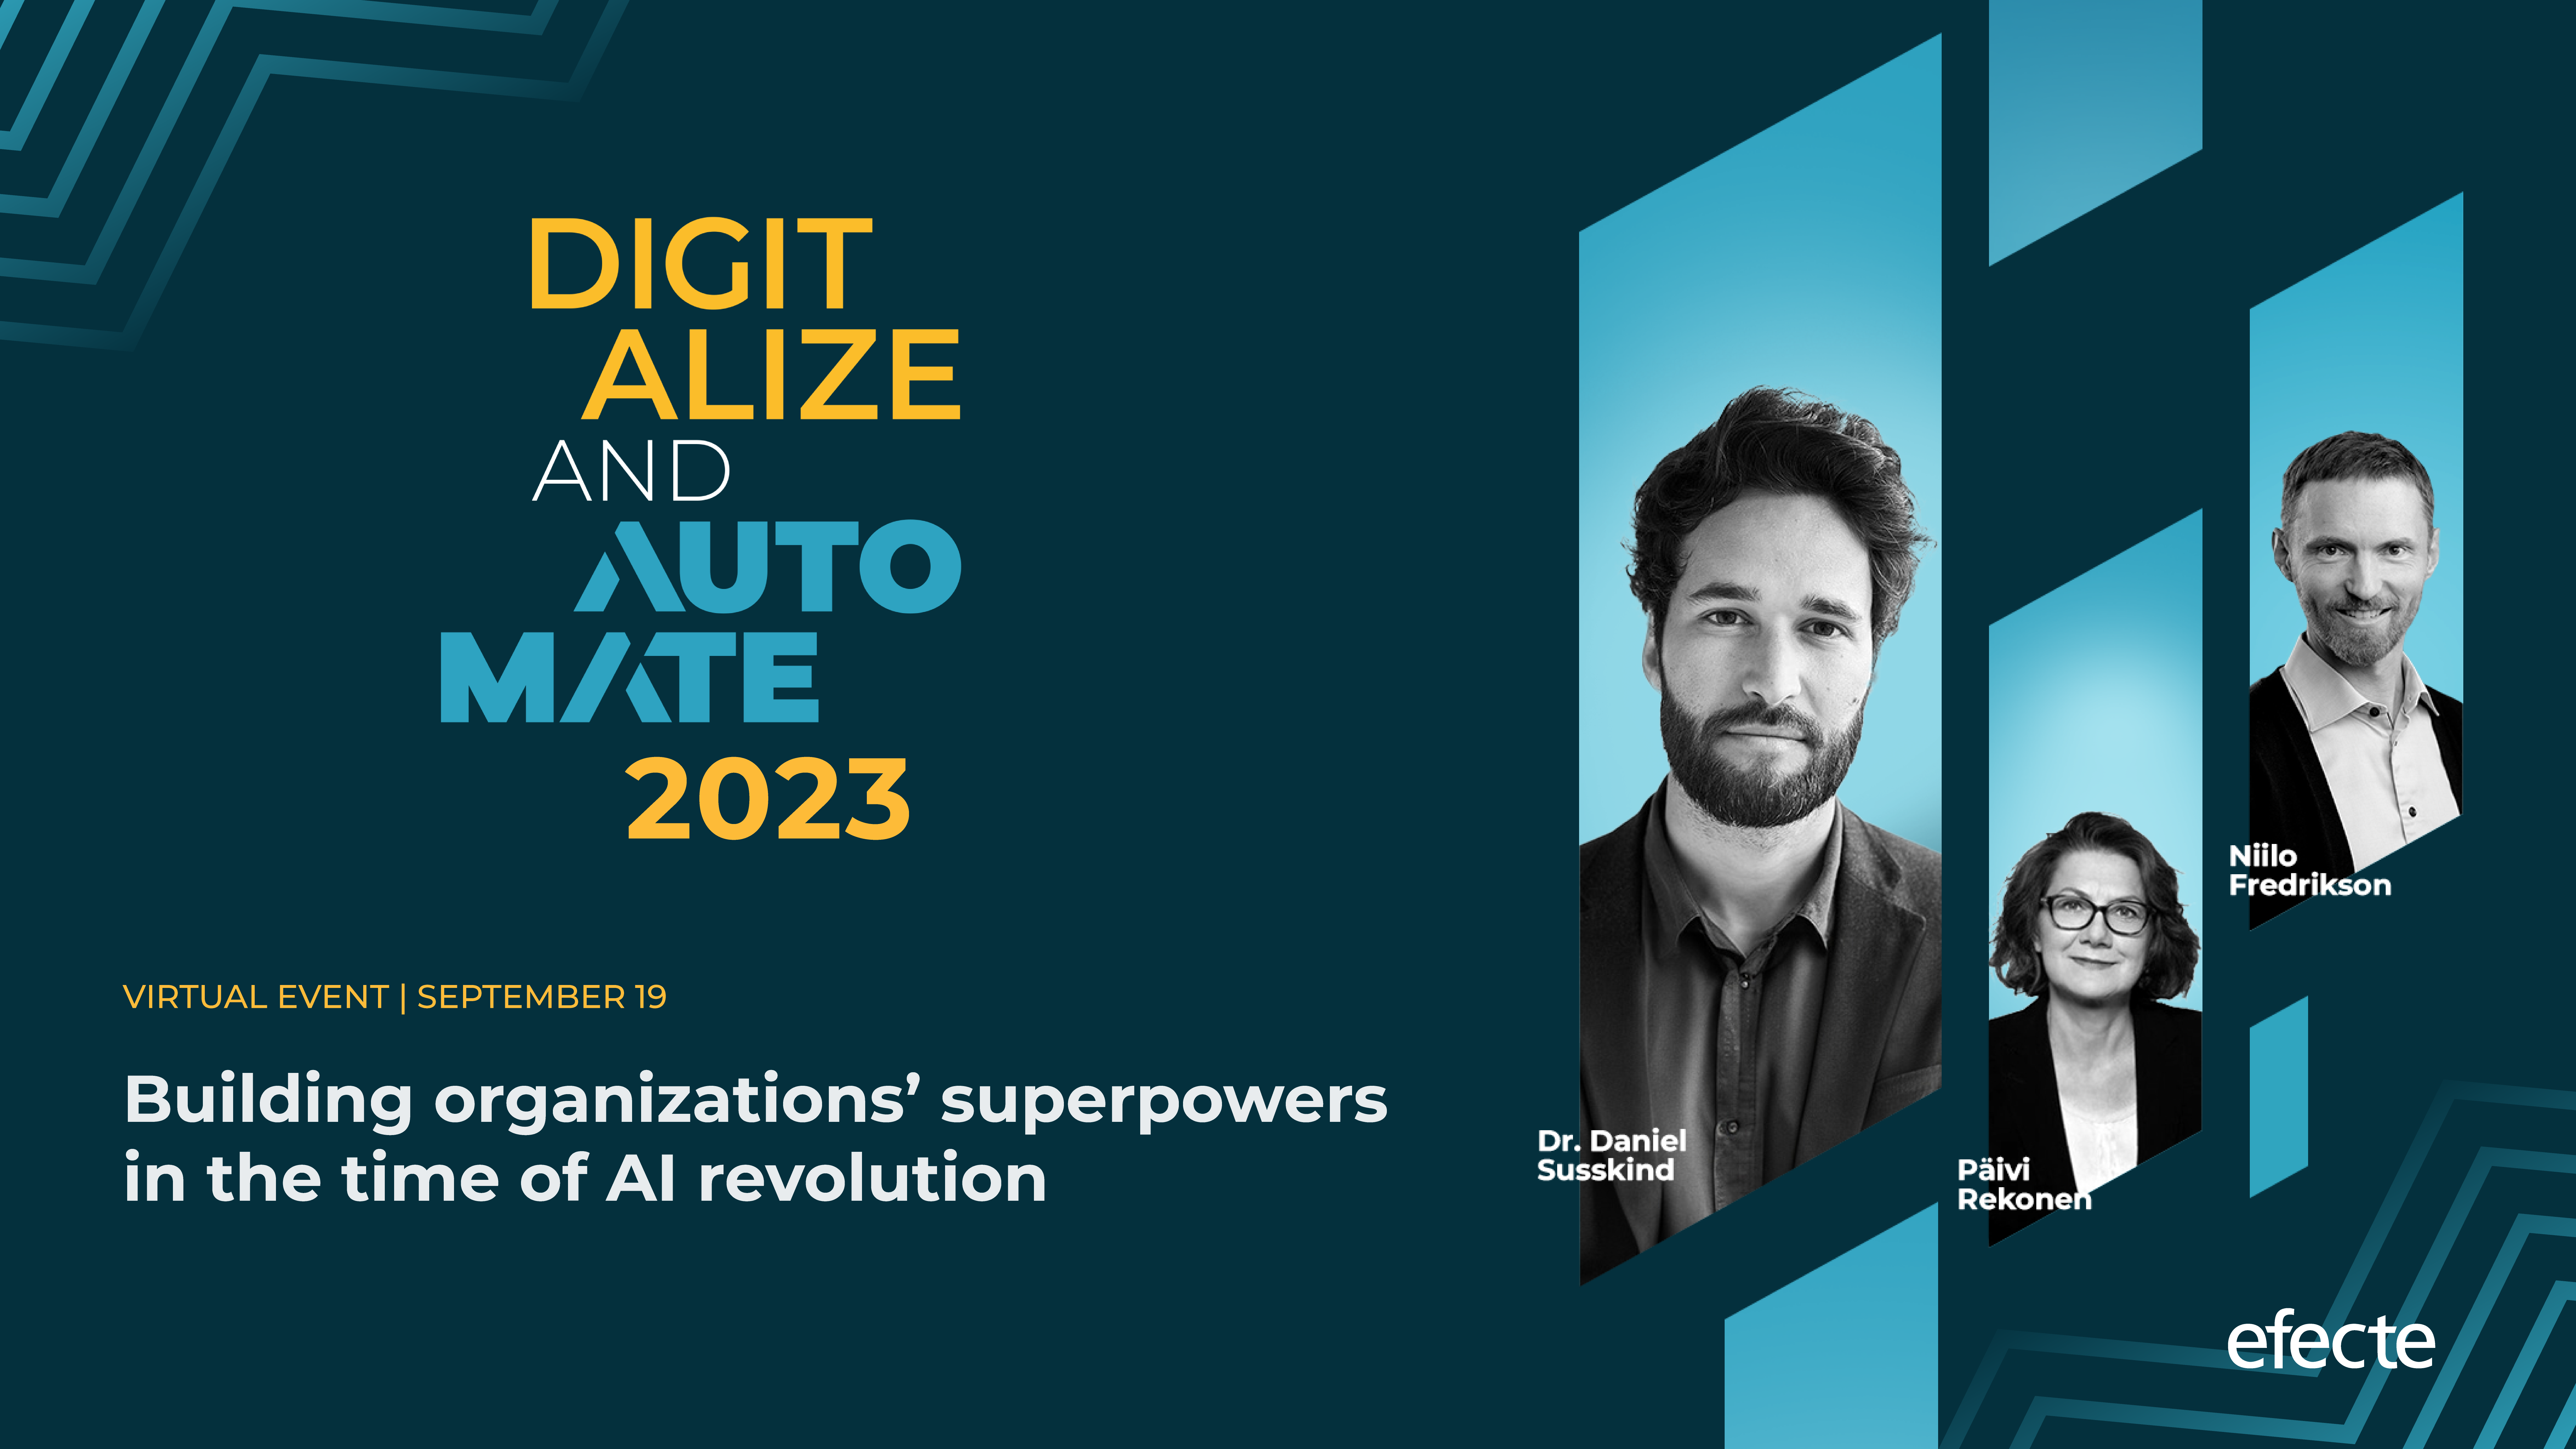 Digitalize and Automate 2023